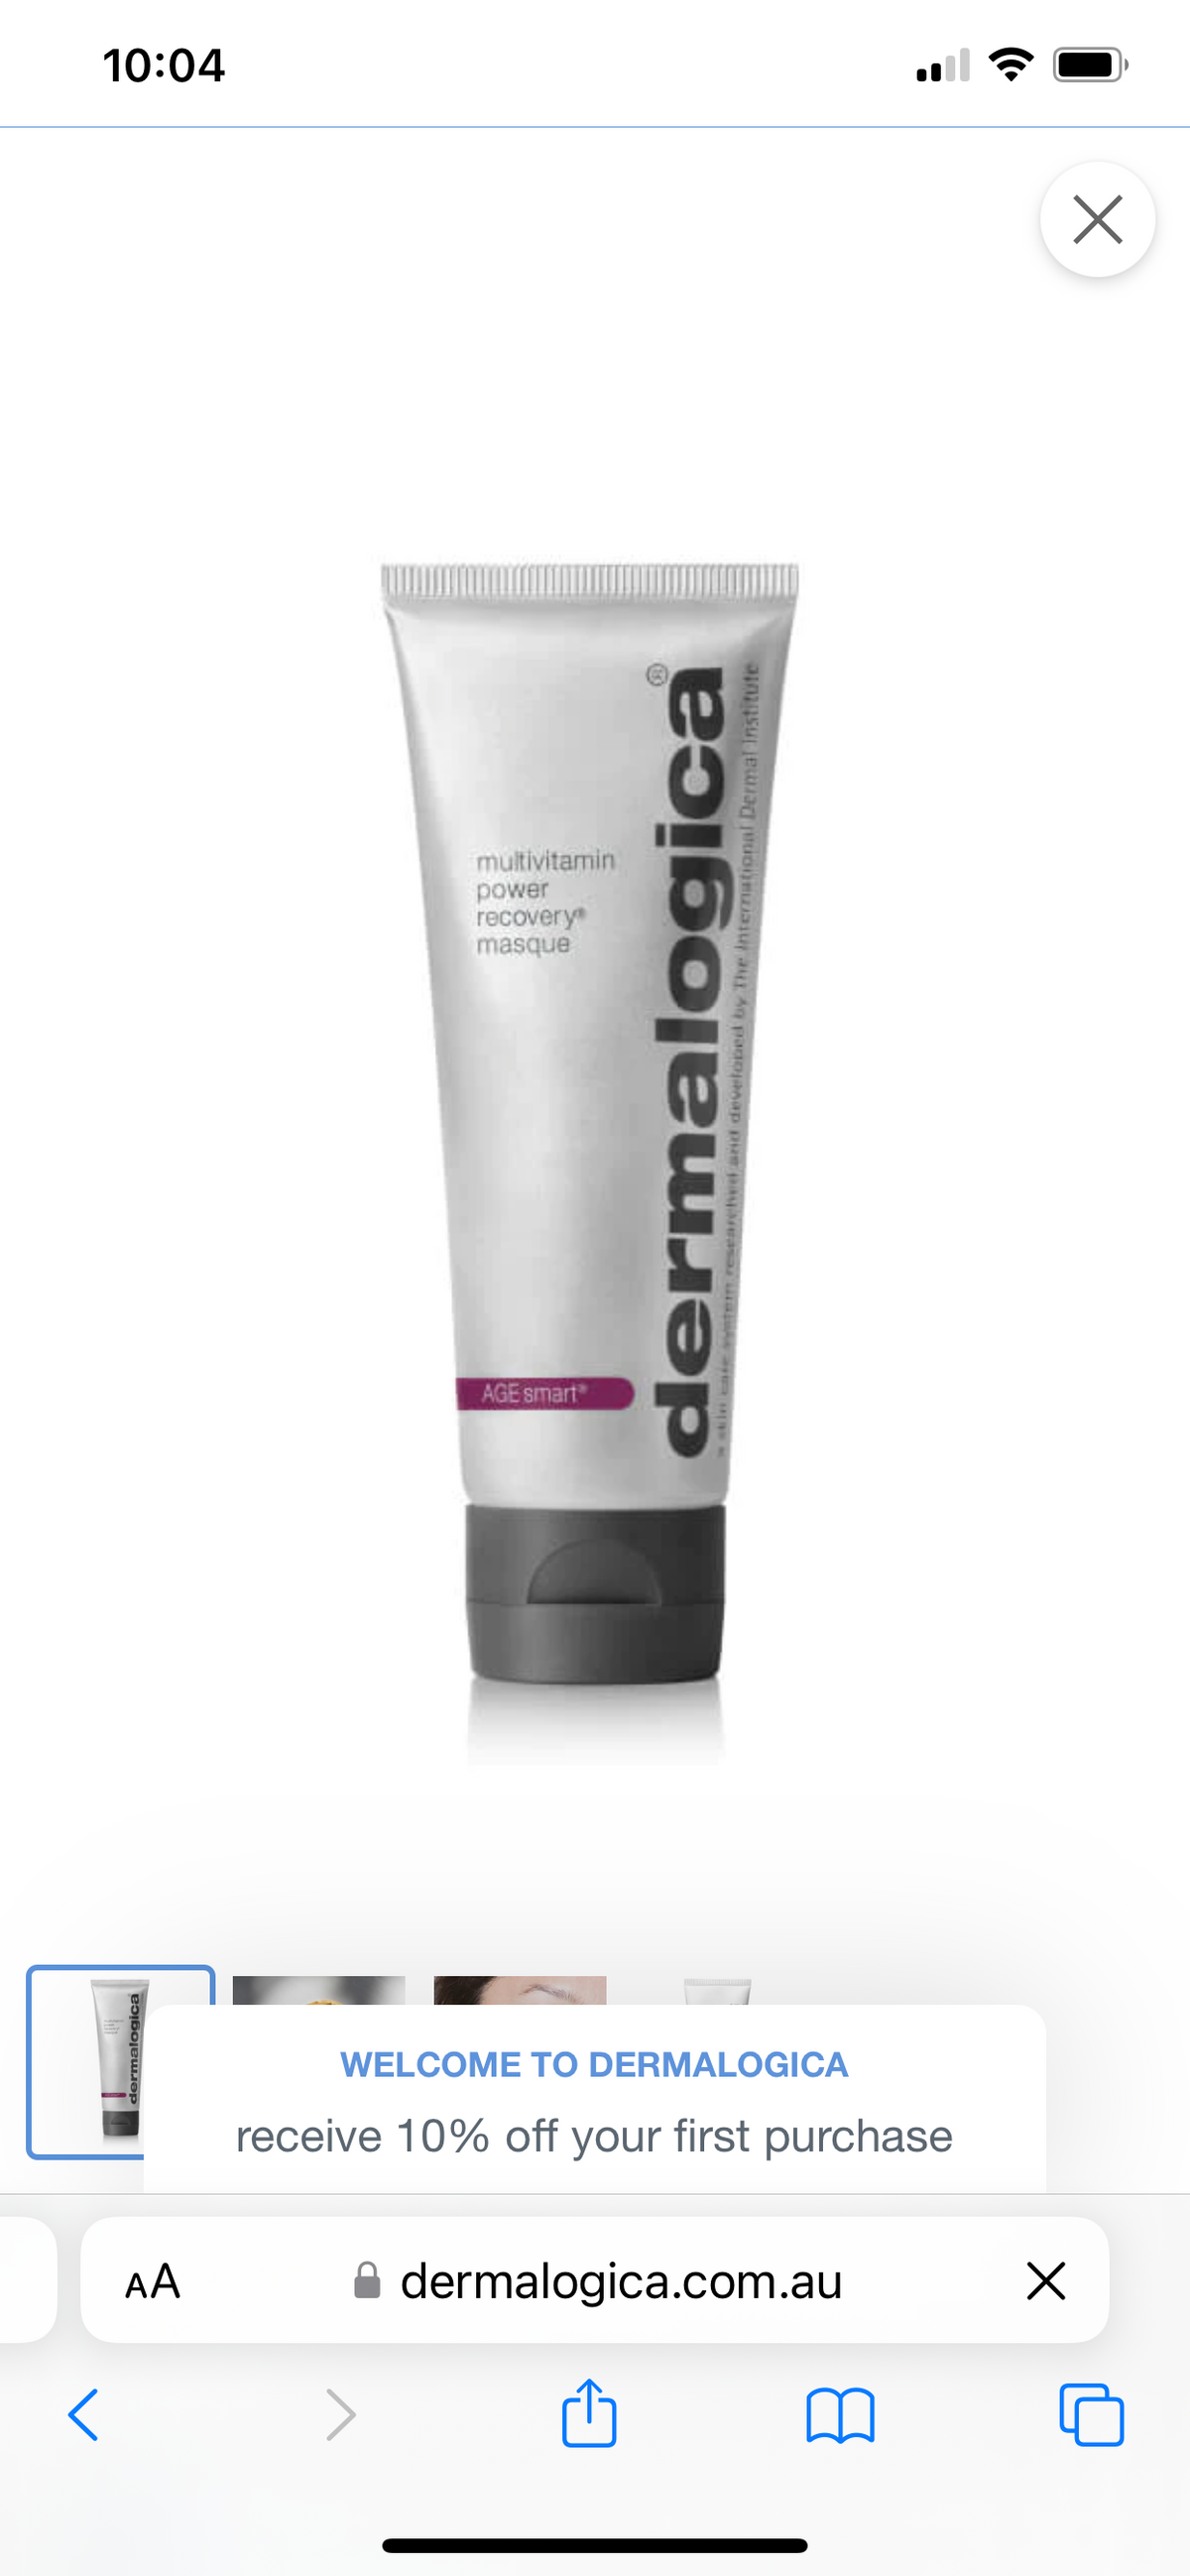 Mask | Multivitamin Power Recovery Mask - Dermalogica